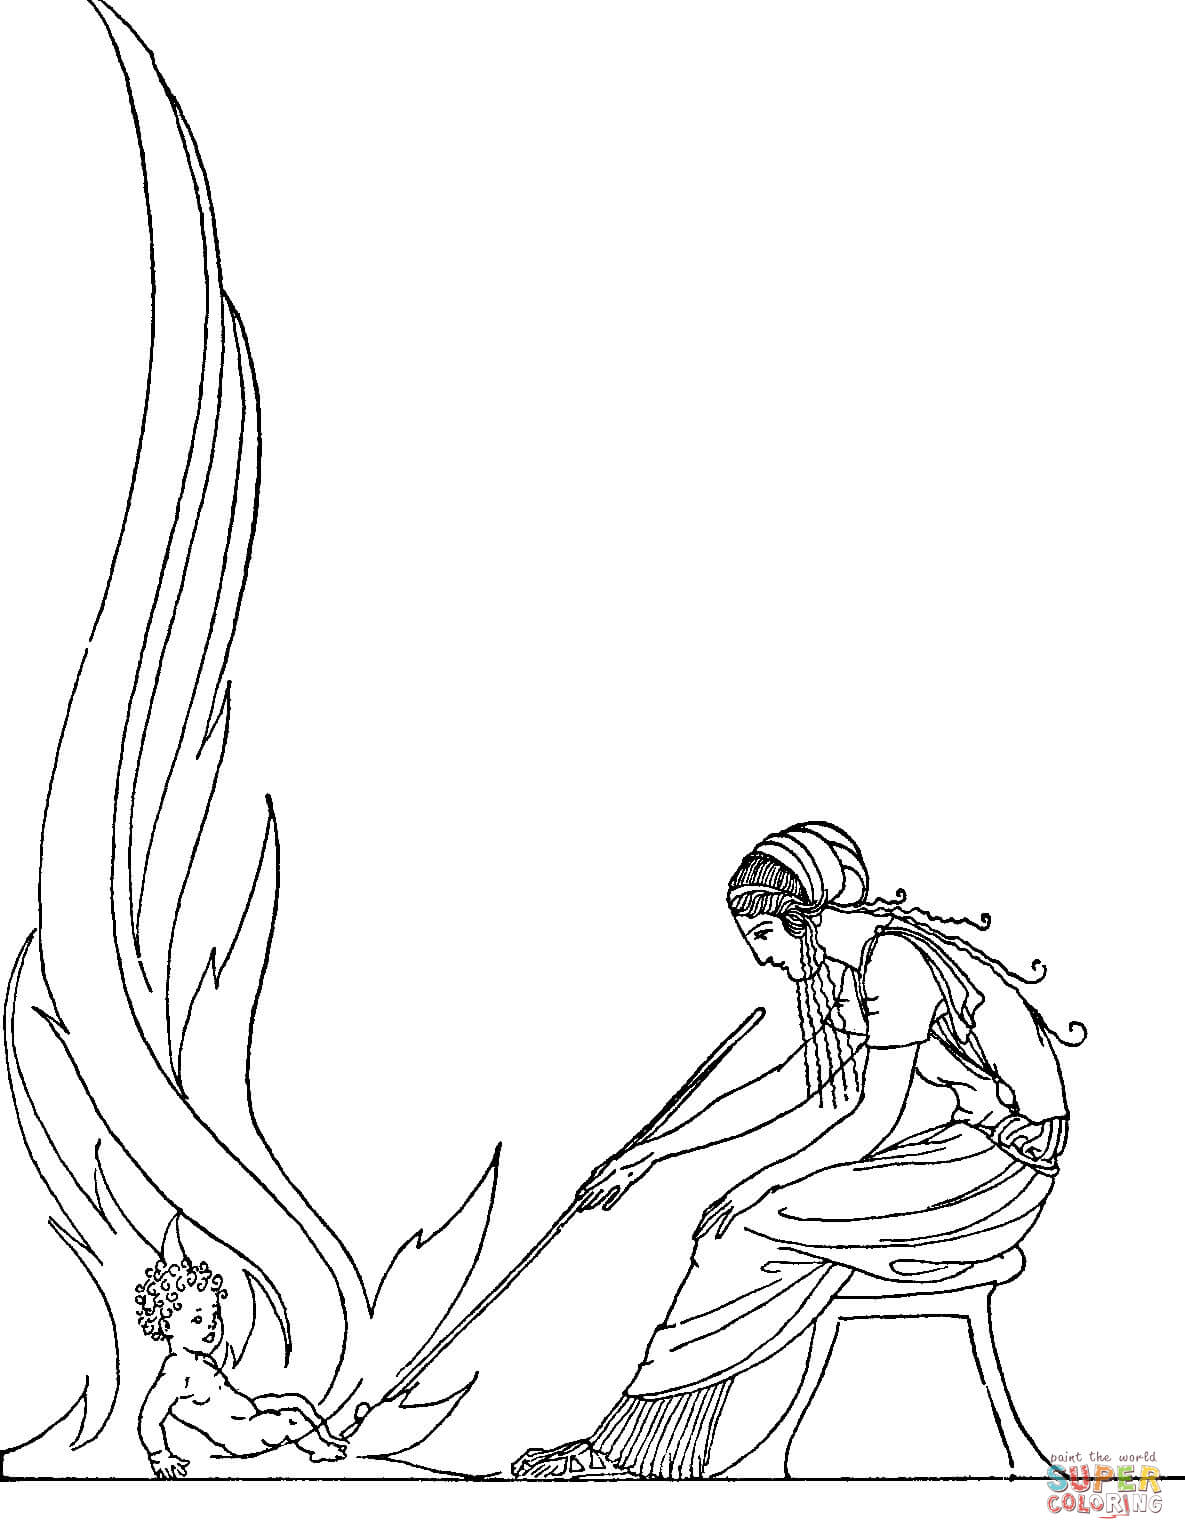 Demeter and Demophon coloring page.